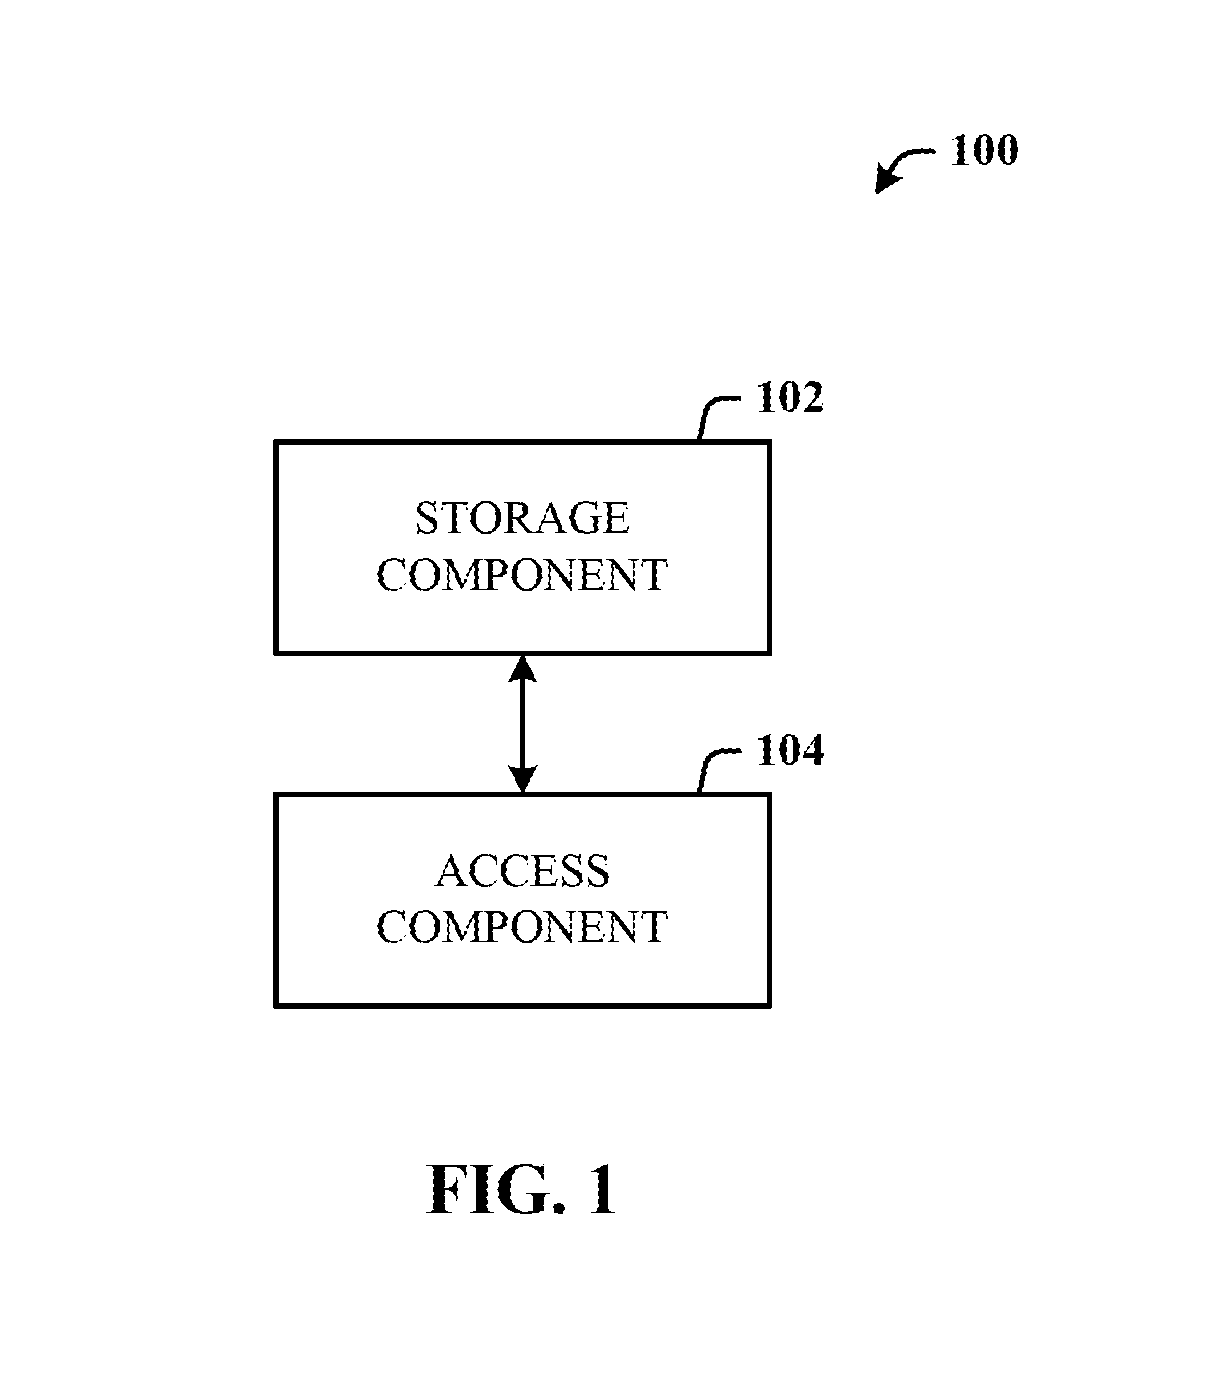 Peer-to-peer exchange of data resources in a control system